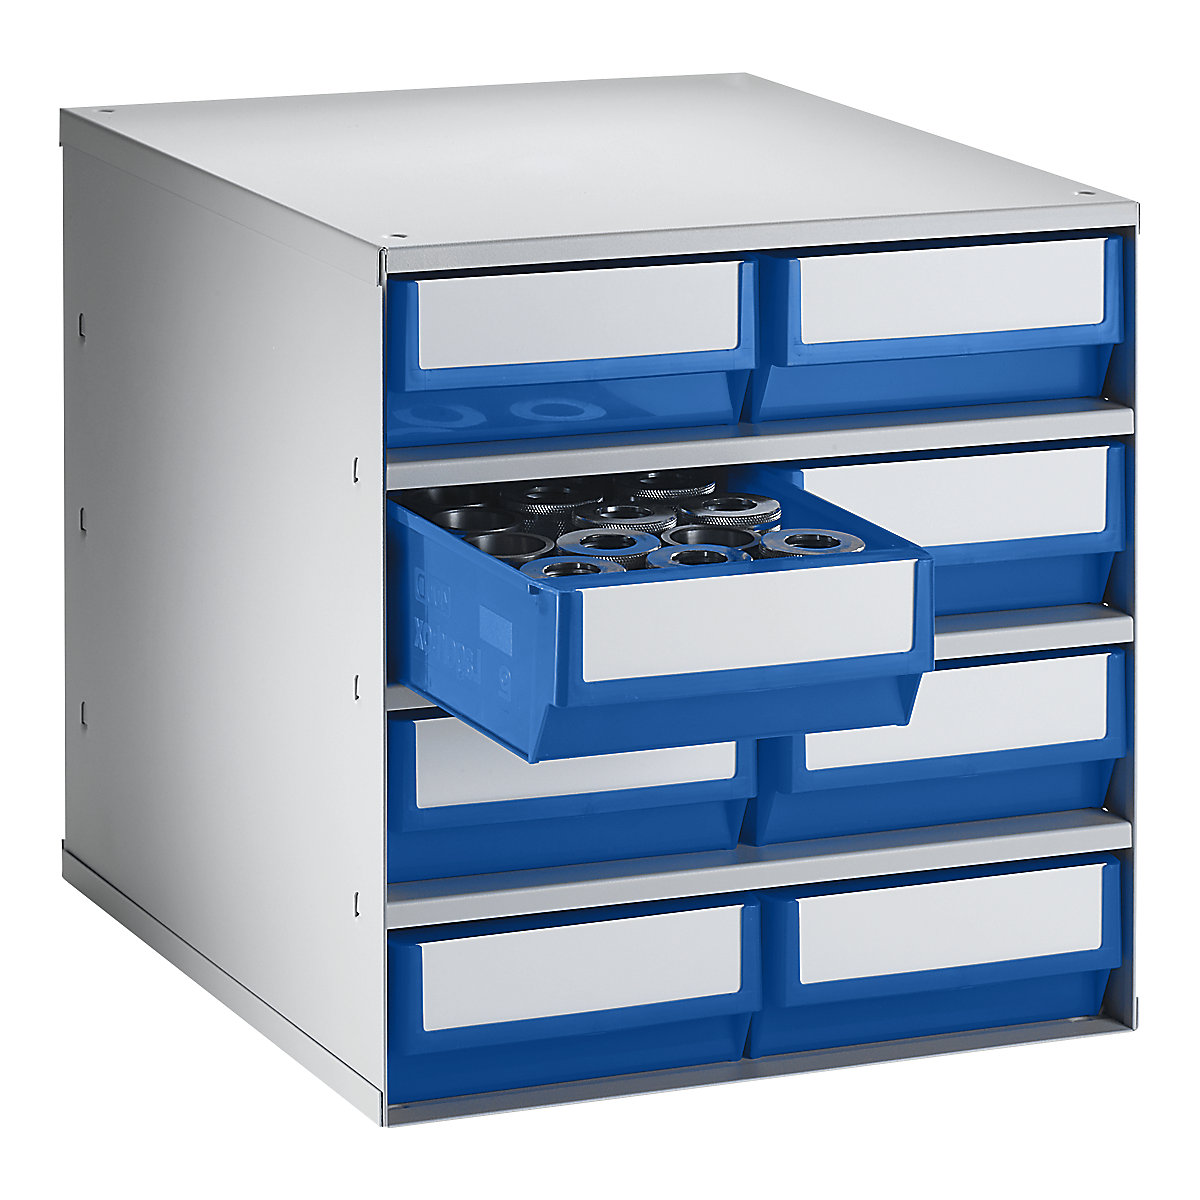 Drawer cabinet, max. housing load 75 kg, HxWxD 395 x 376 x 400 mm, 8 drawers, blue drawers-4